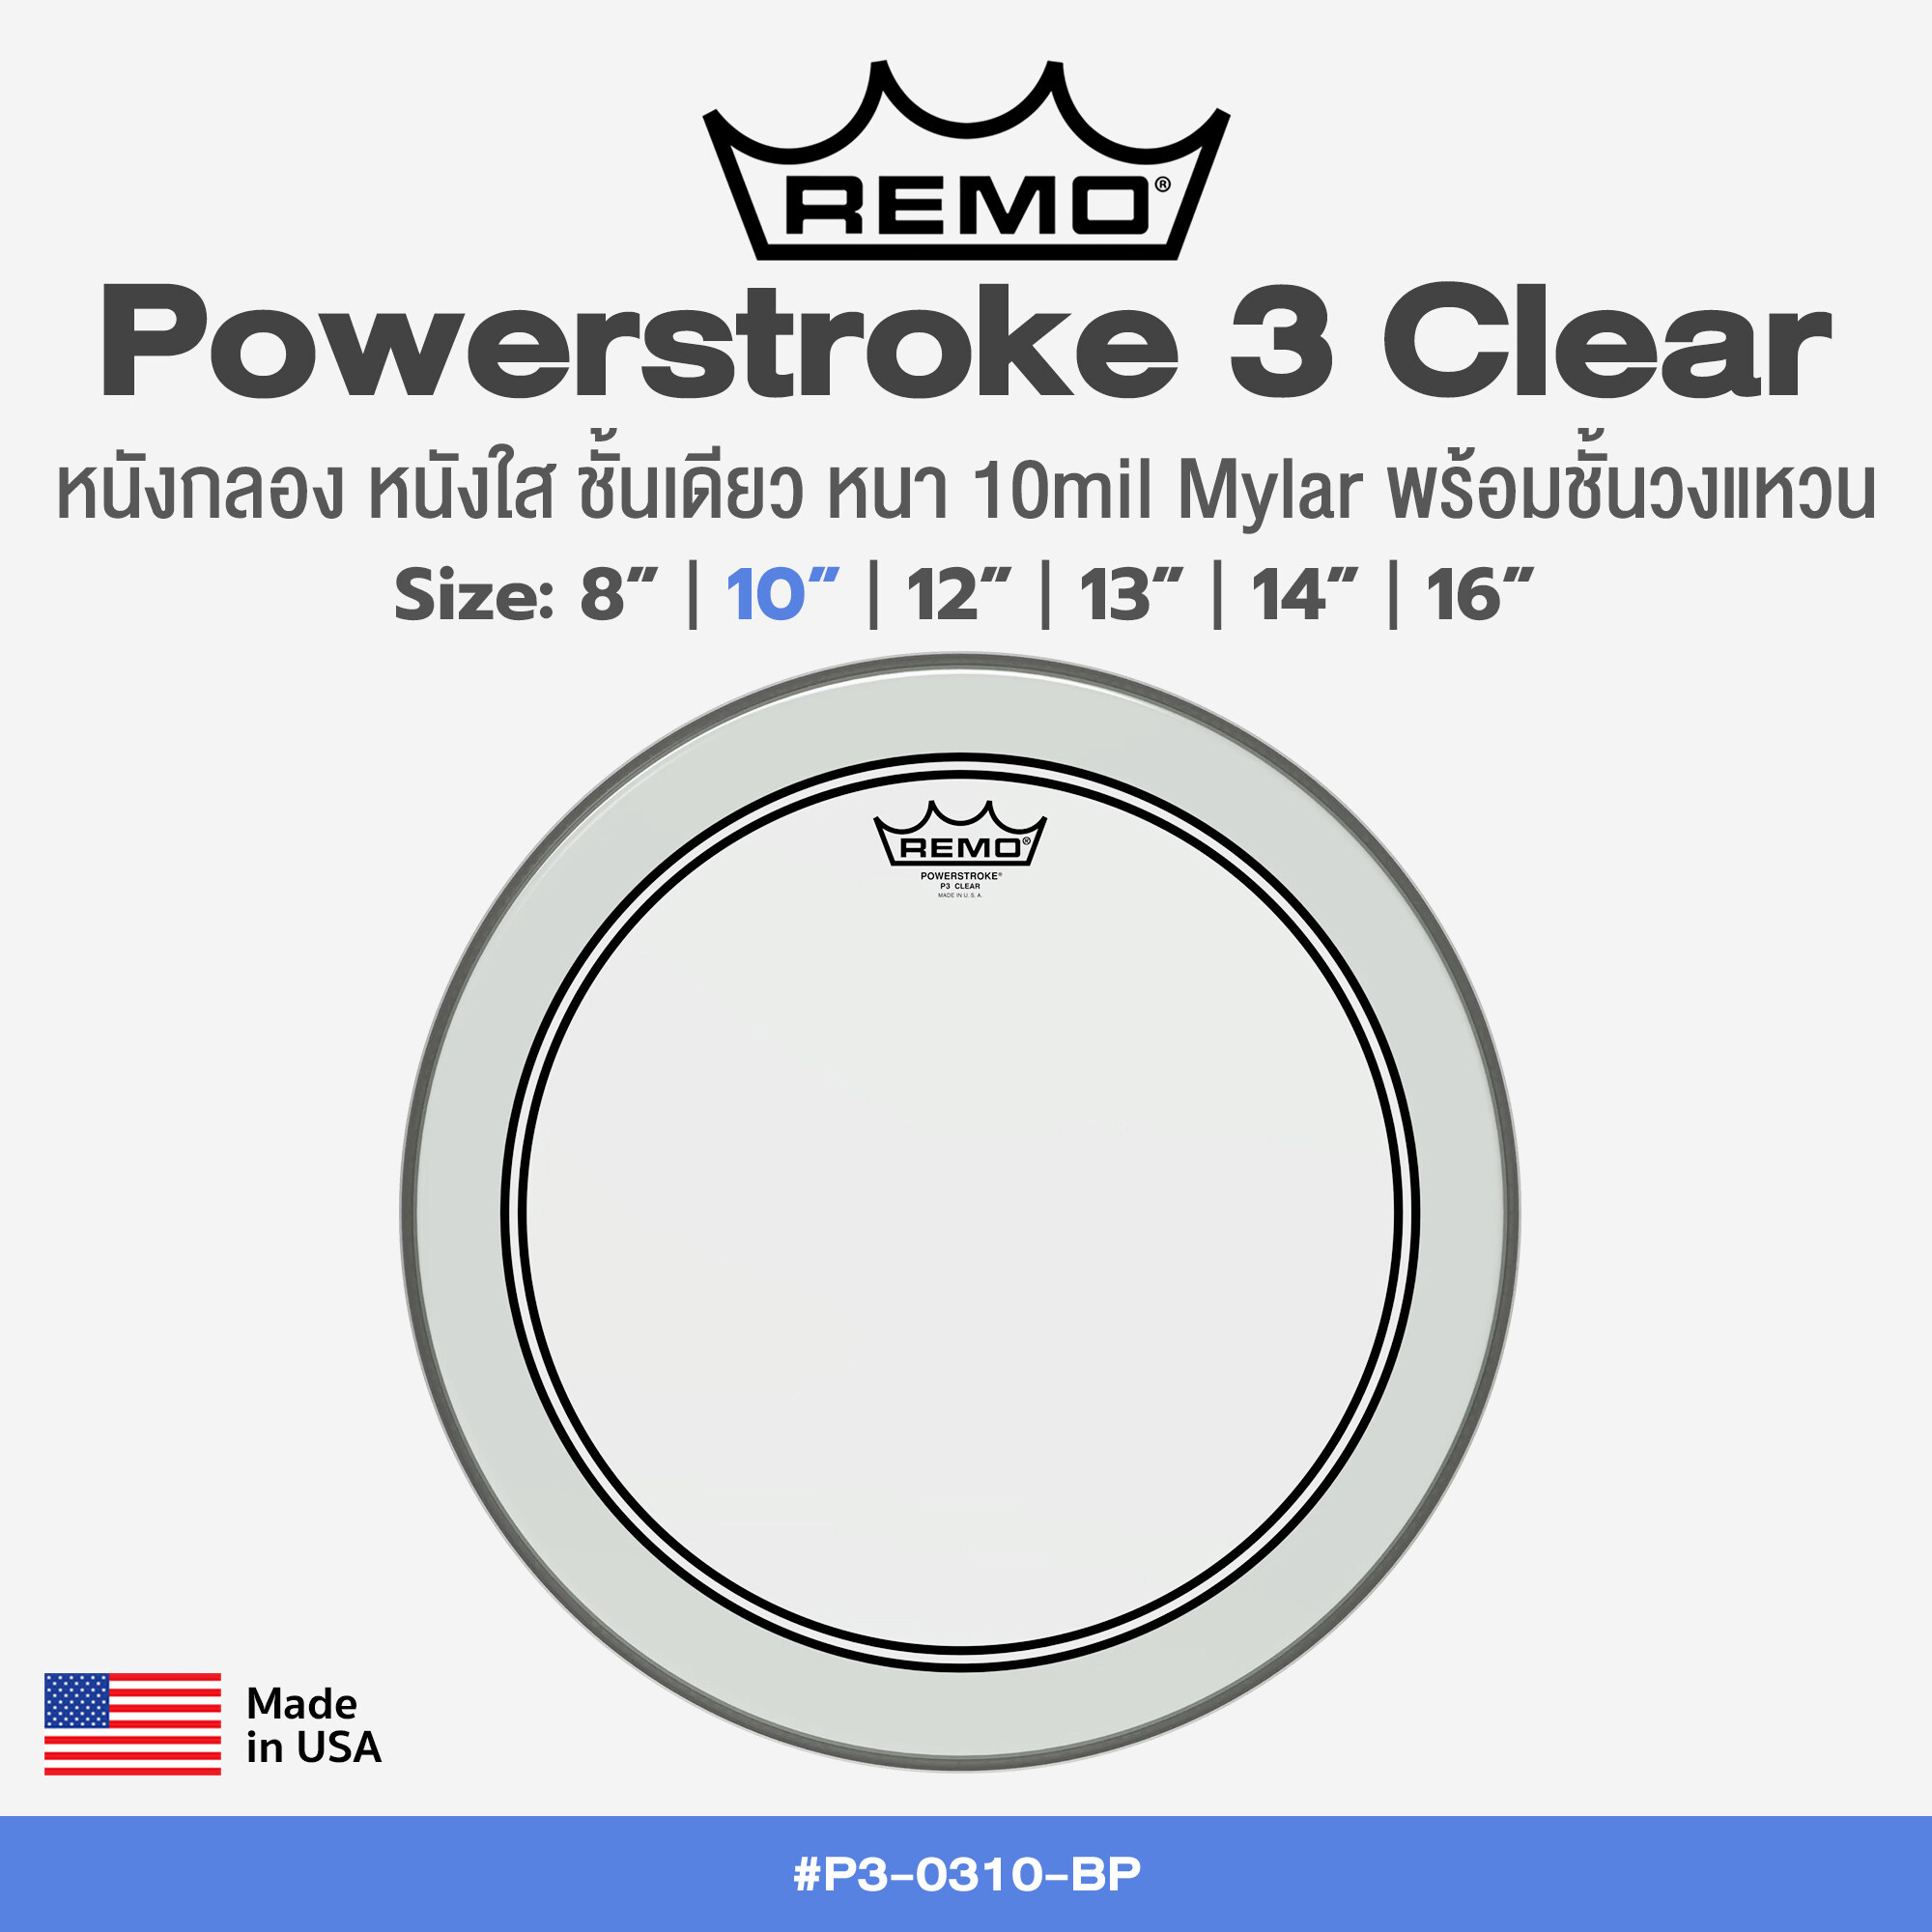 Remo Powerstroke 3 Clear